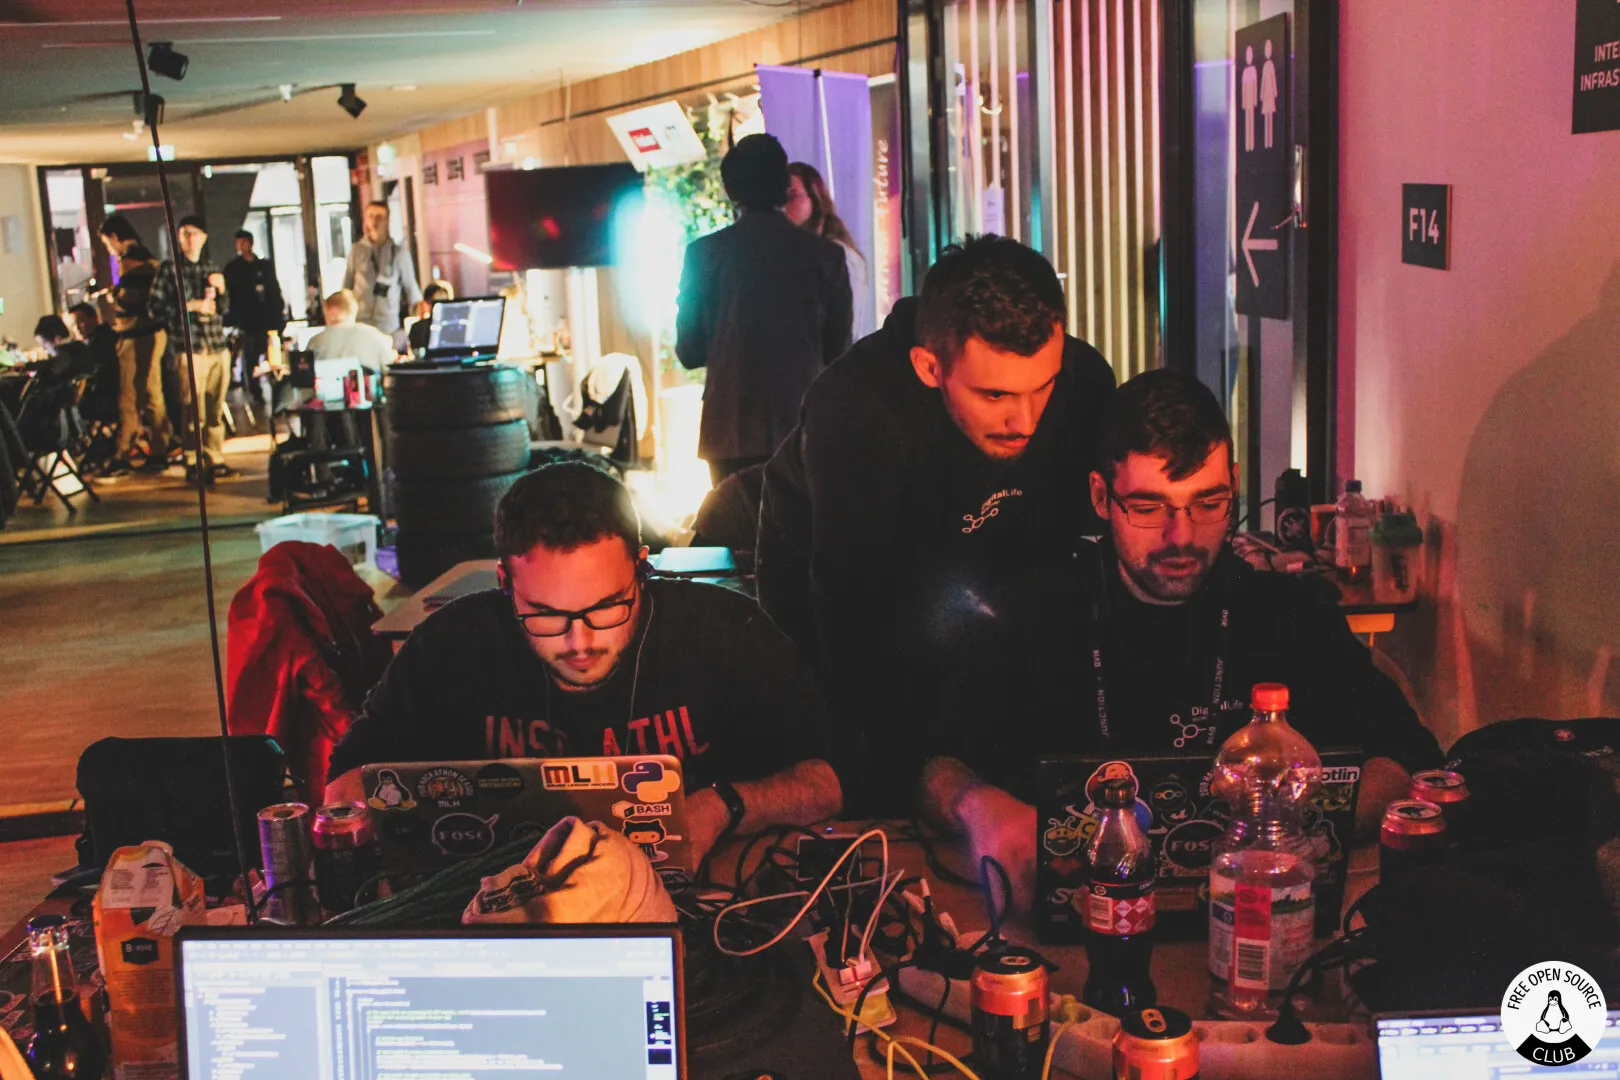 Hacking at Junction 2019